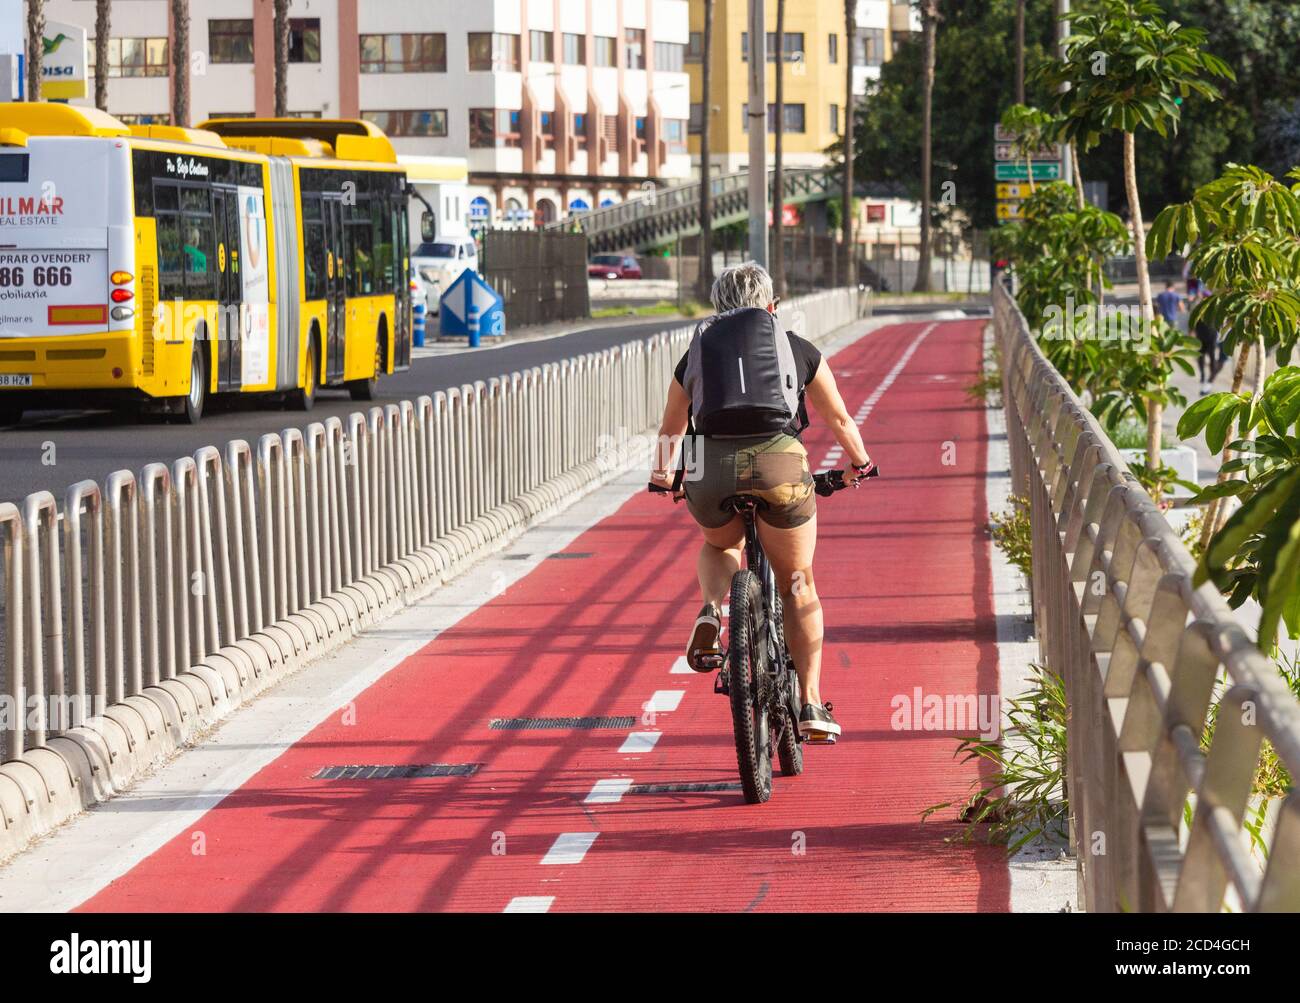 Cycle path segregated from traffic in Las Palmas city on Gran Canaria, Canary Islands, Spain. Stock Photo